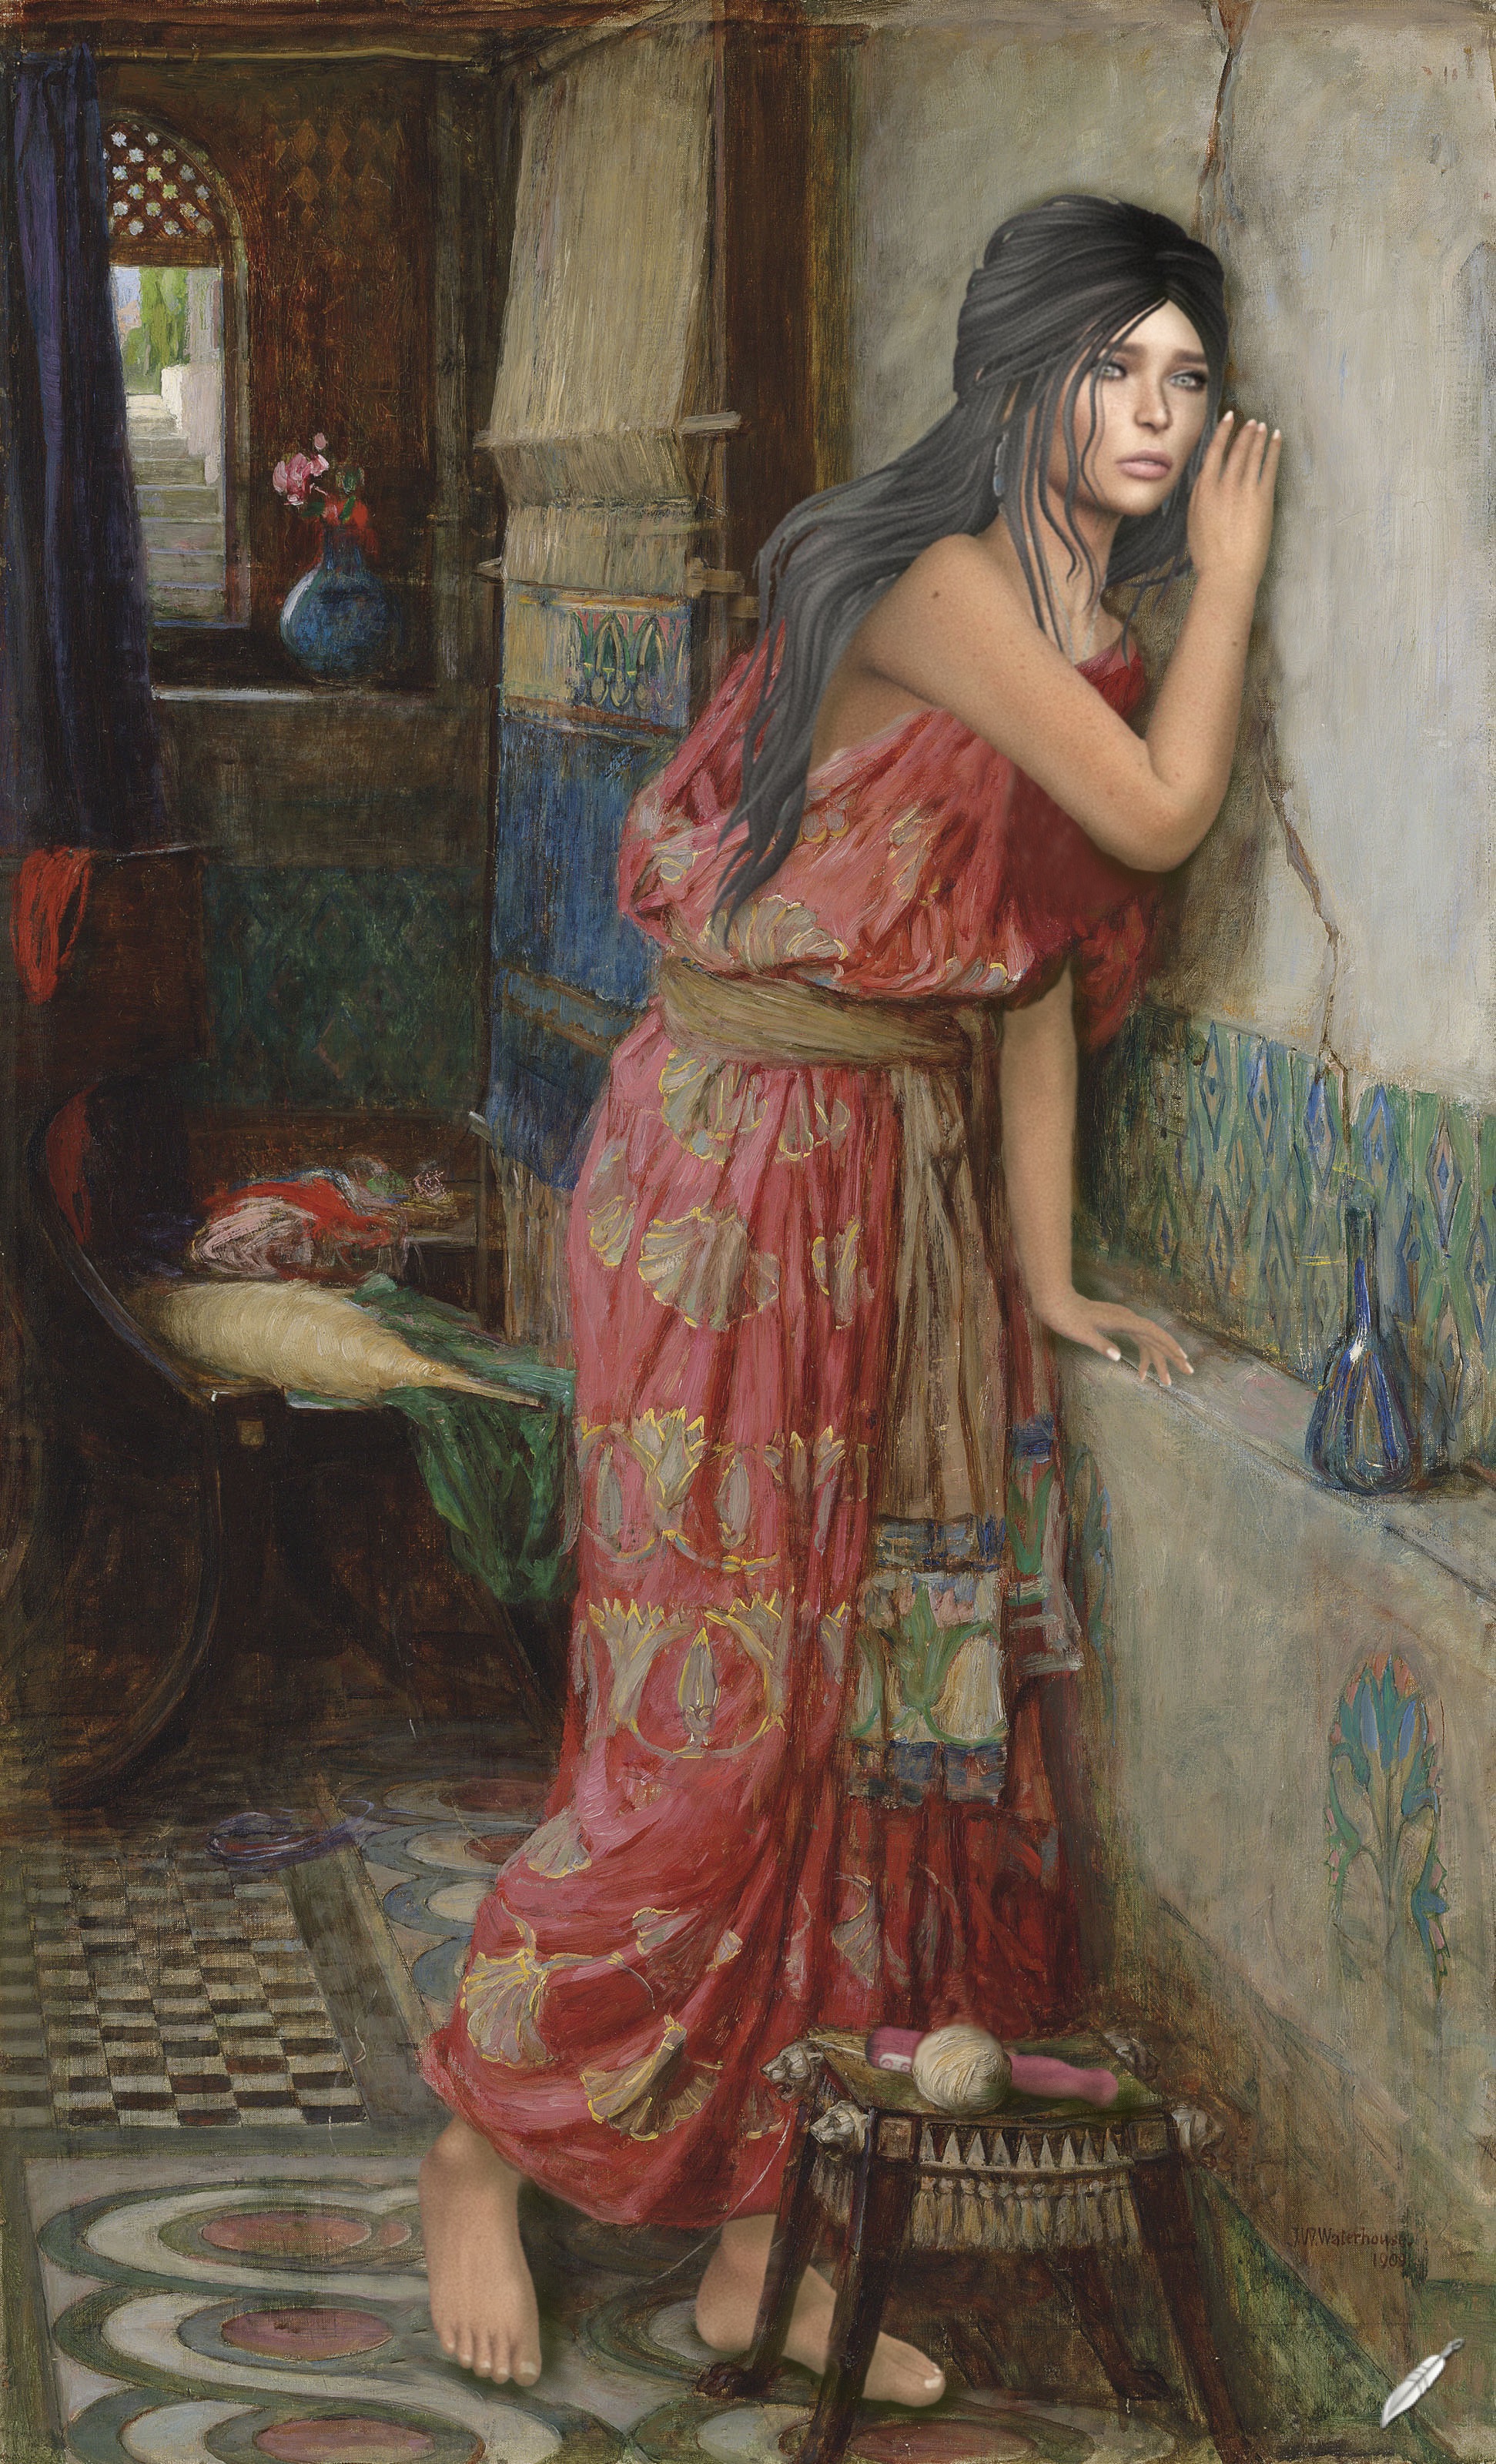 John William Waterhouse - The Confinement of Thisbe